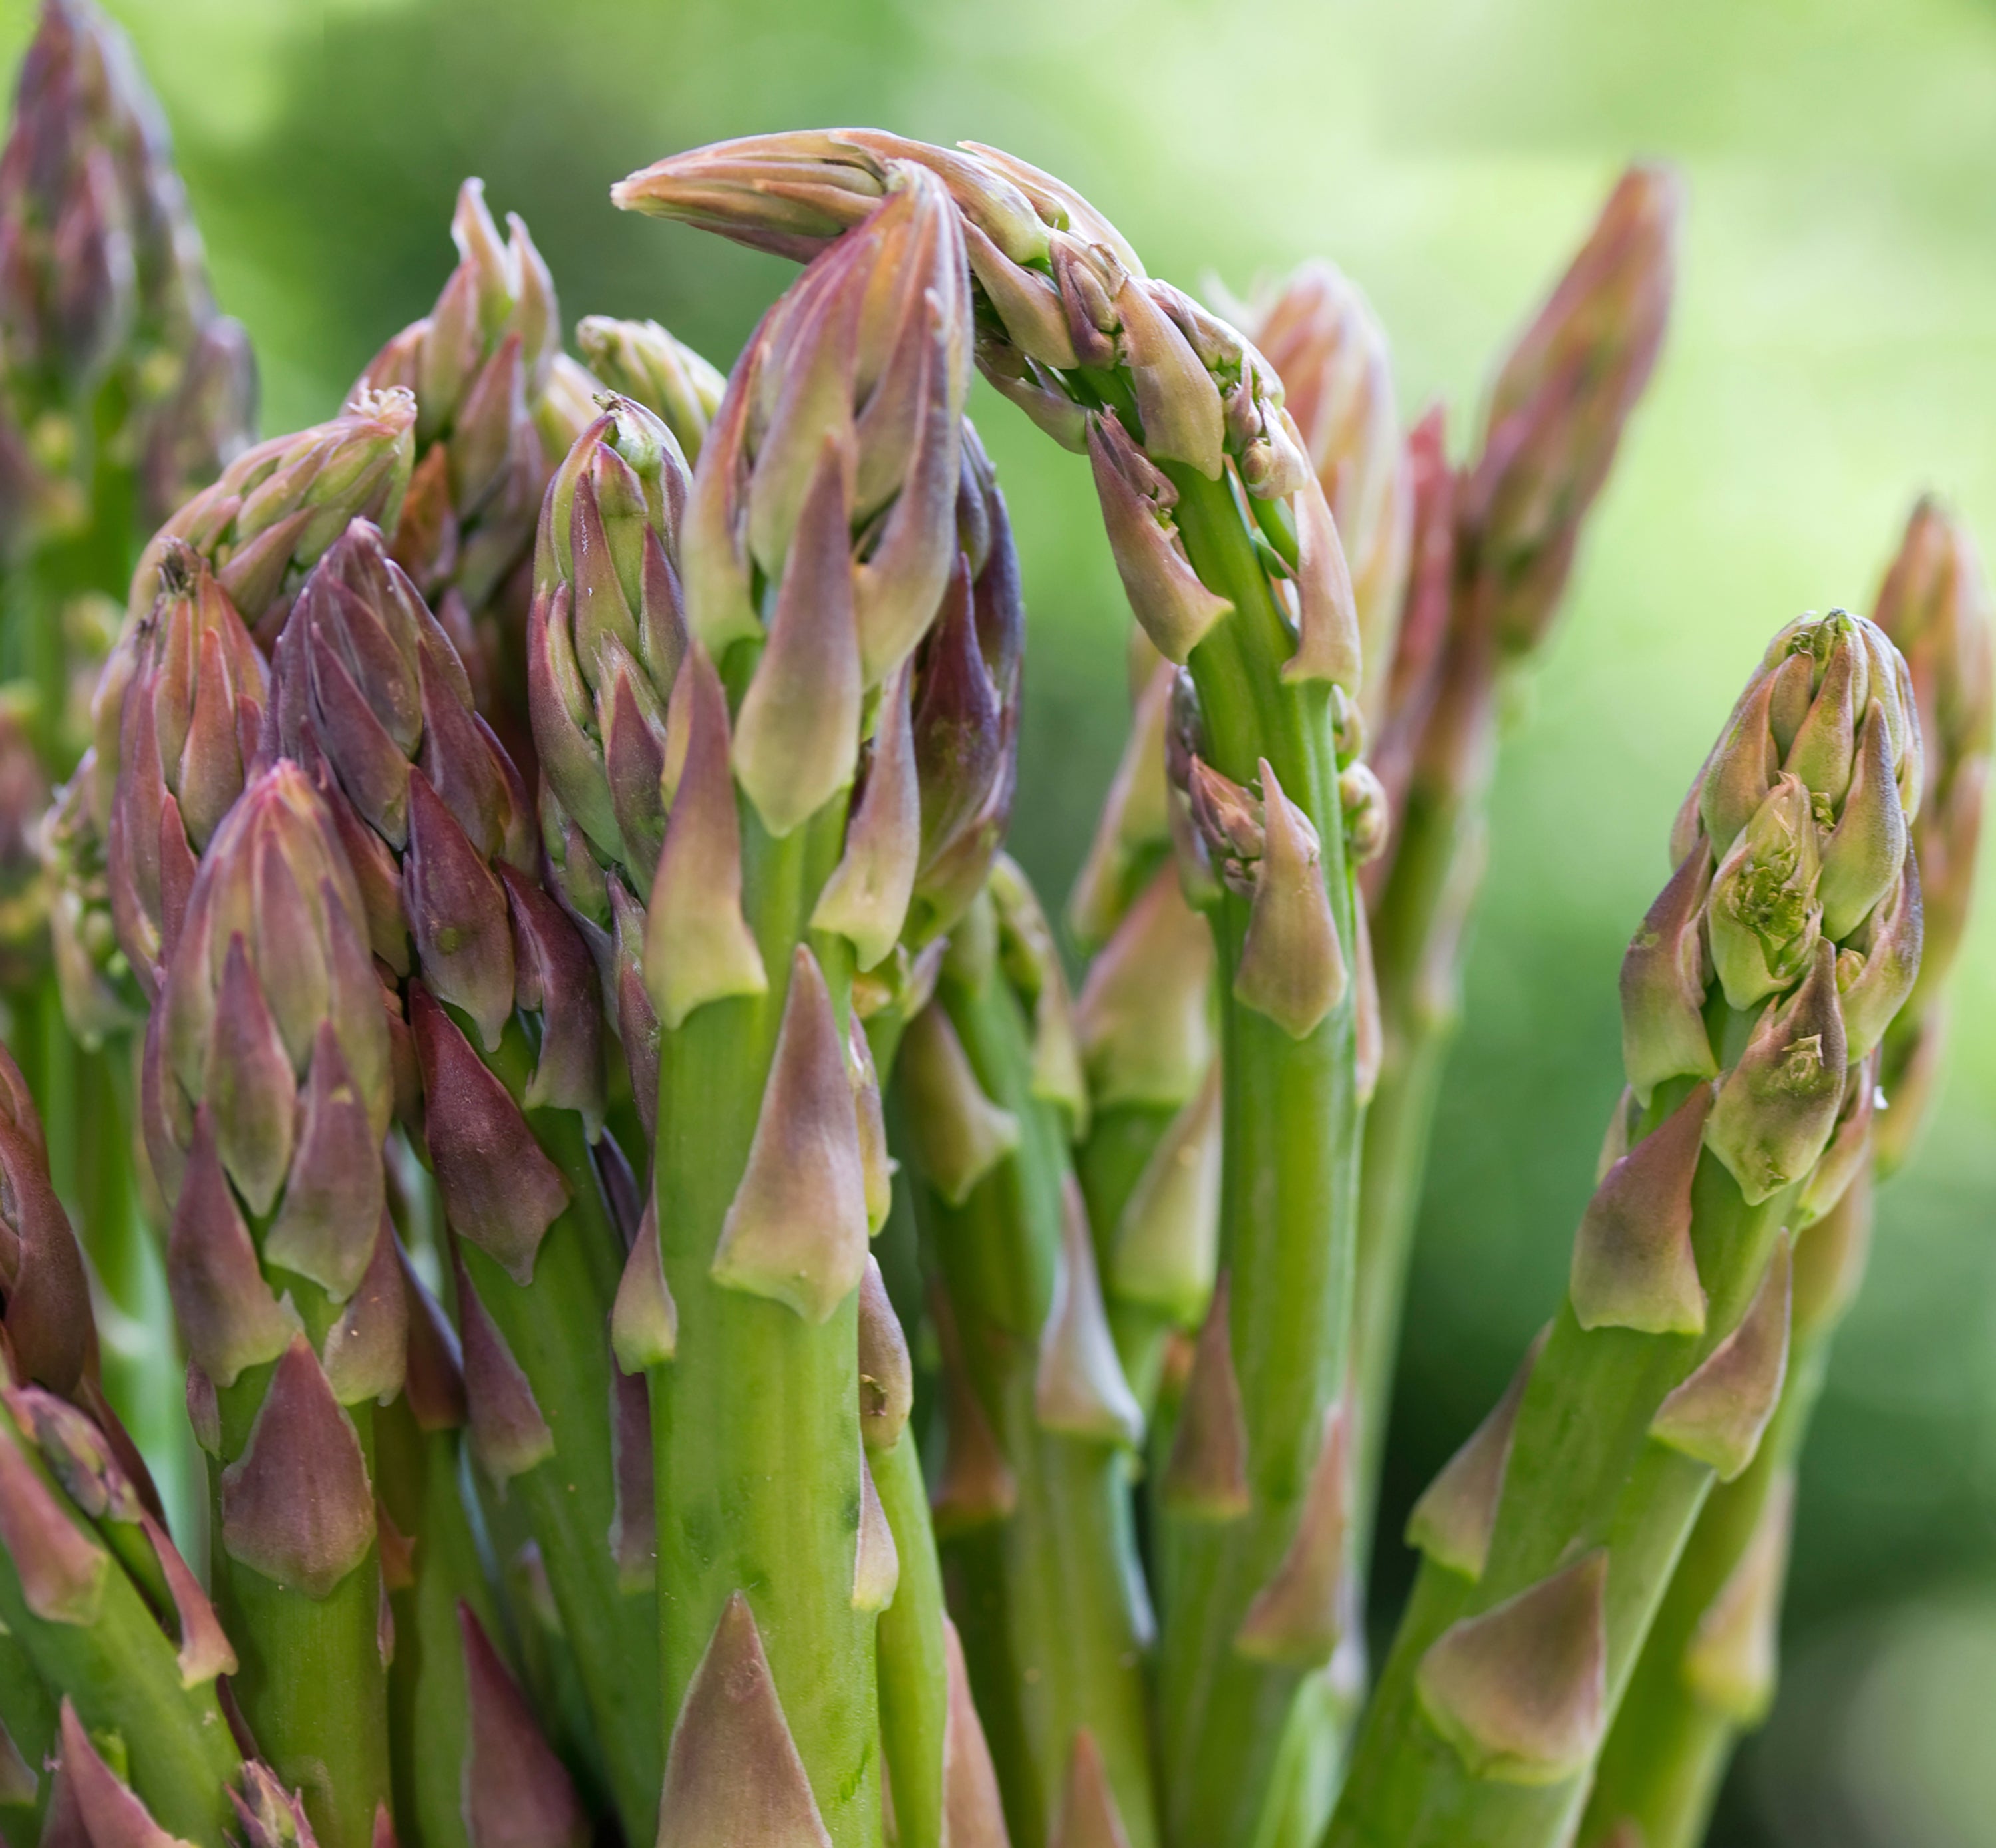 This image provided by Ball Horticultural Company shows stalks of Jersey Knight asparagus